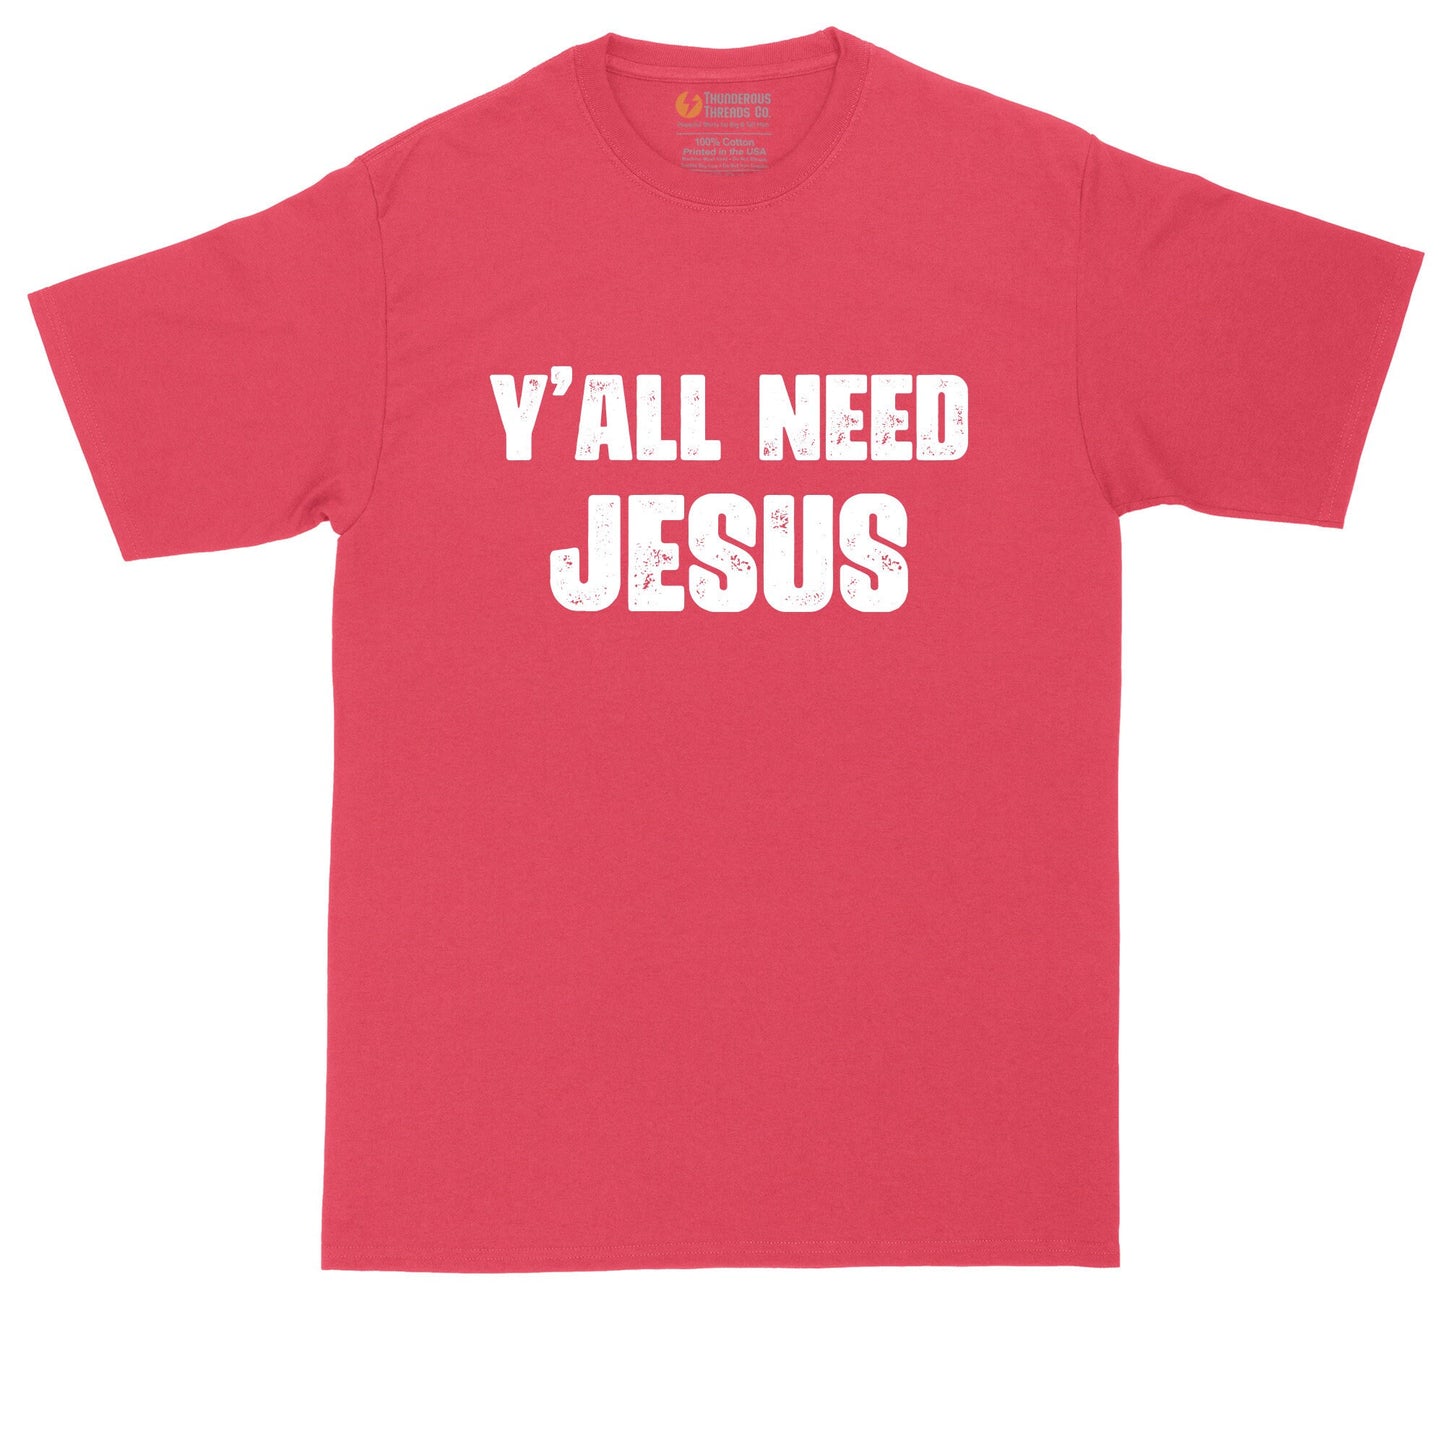 Y'all Need Jesus | Mens Big and Tall T-Shirt | Funny Christian T-Shirt | Religious T-Shirt | Graphic T-Shirt | Jesus | Trendy T-Shirt